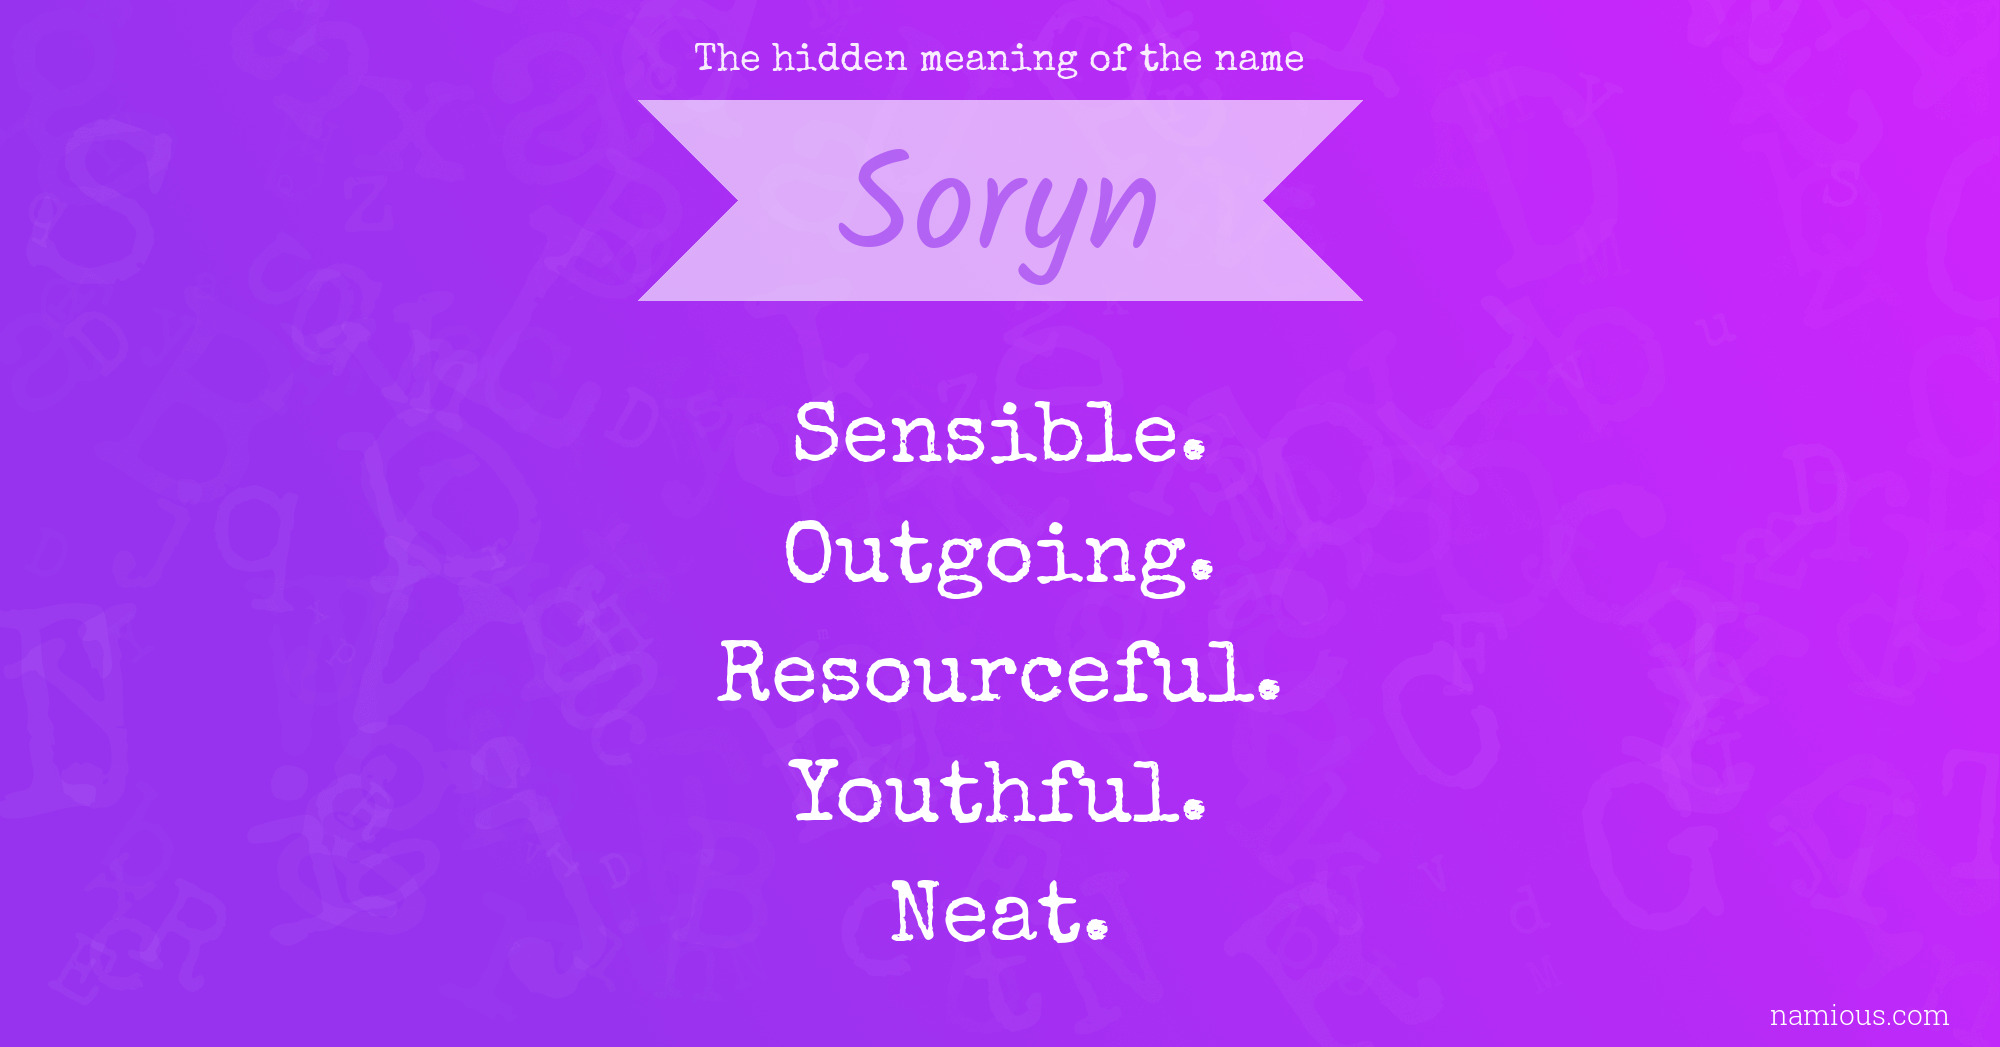 The hidden meaning of the name Soryn